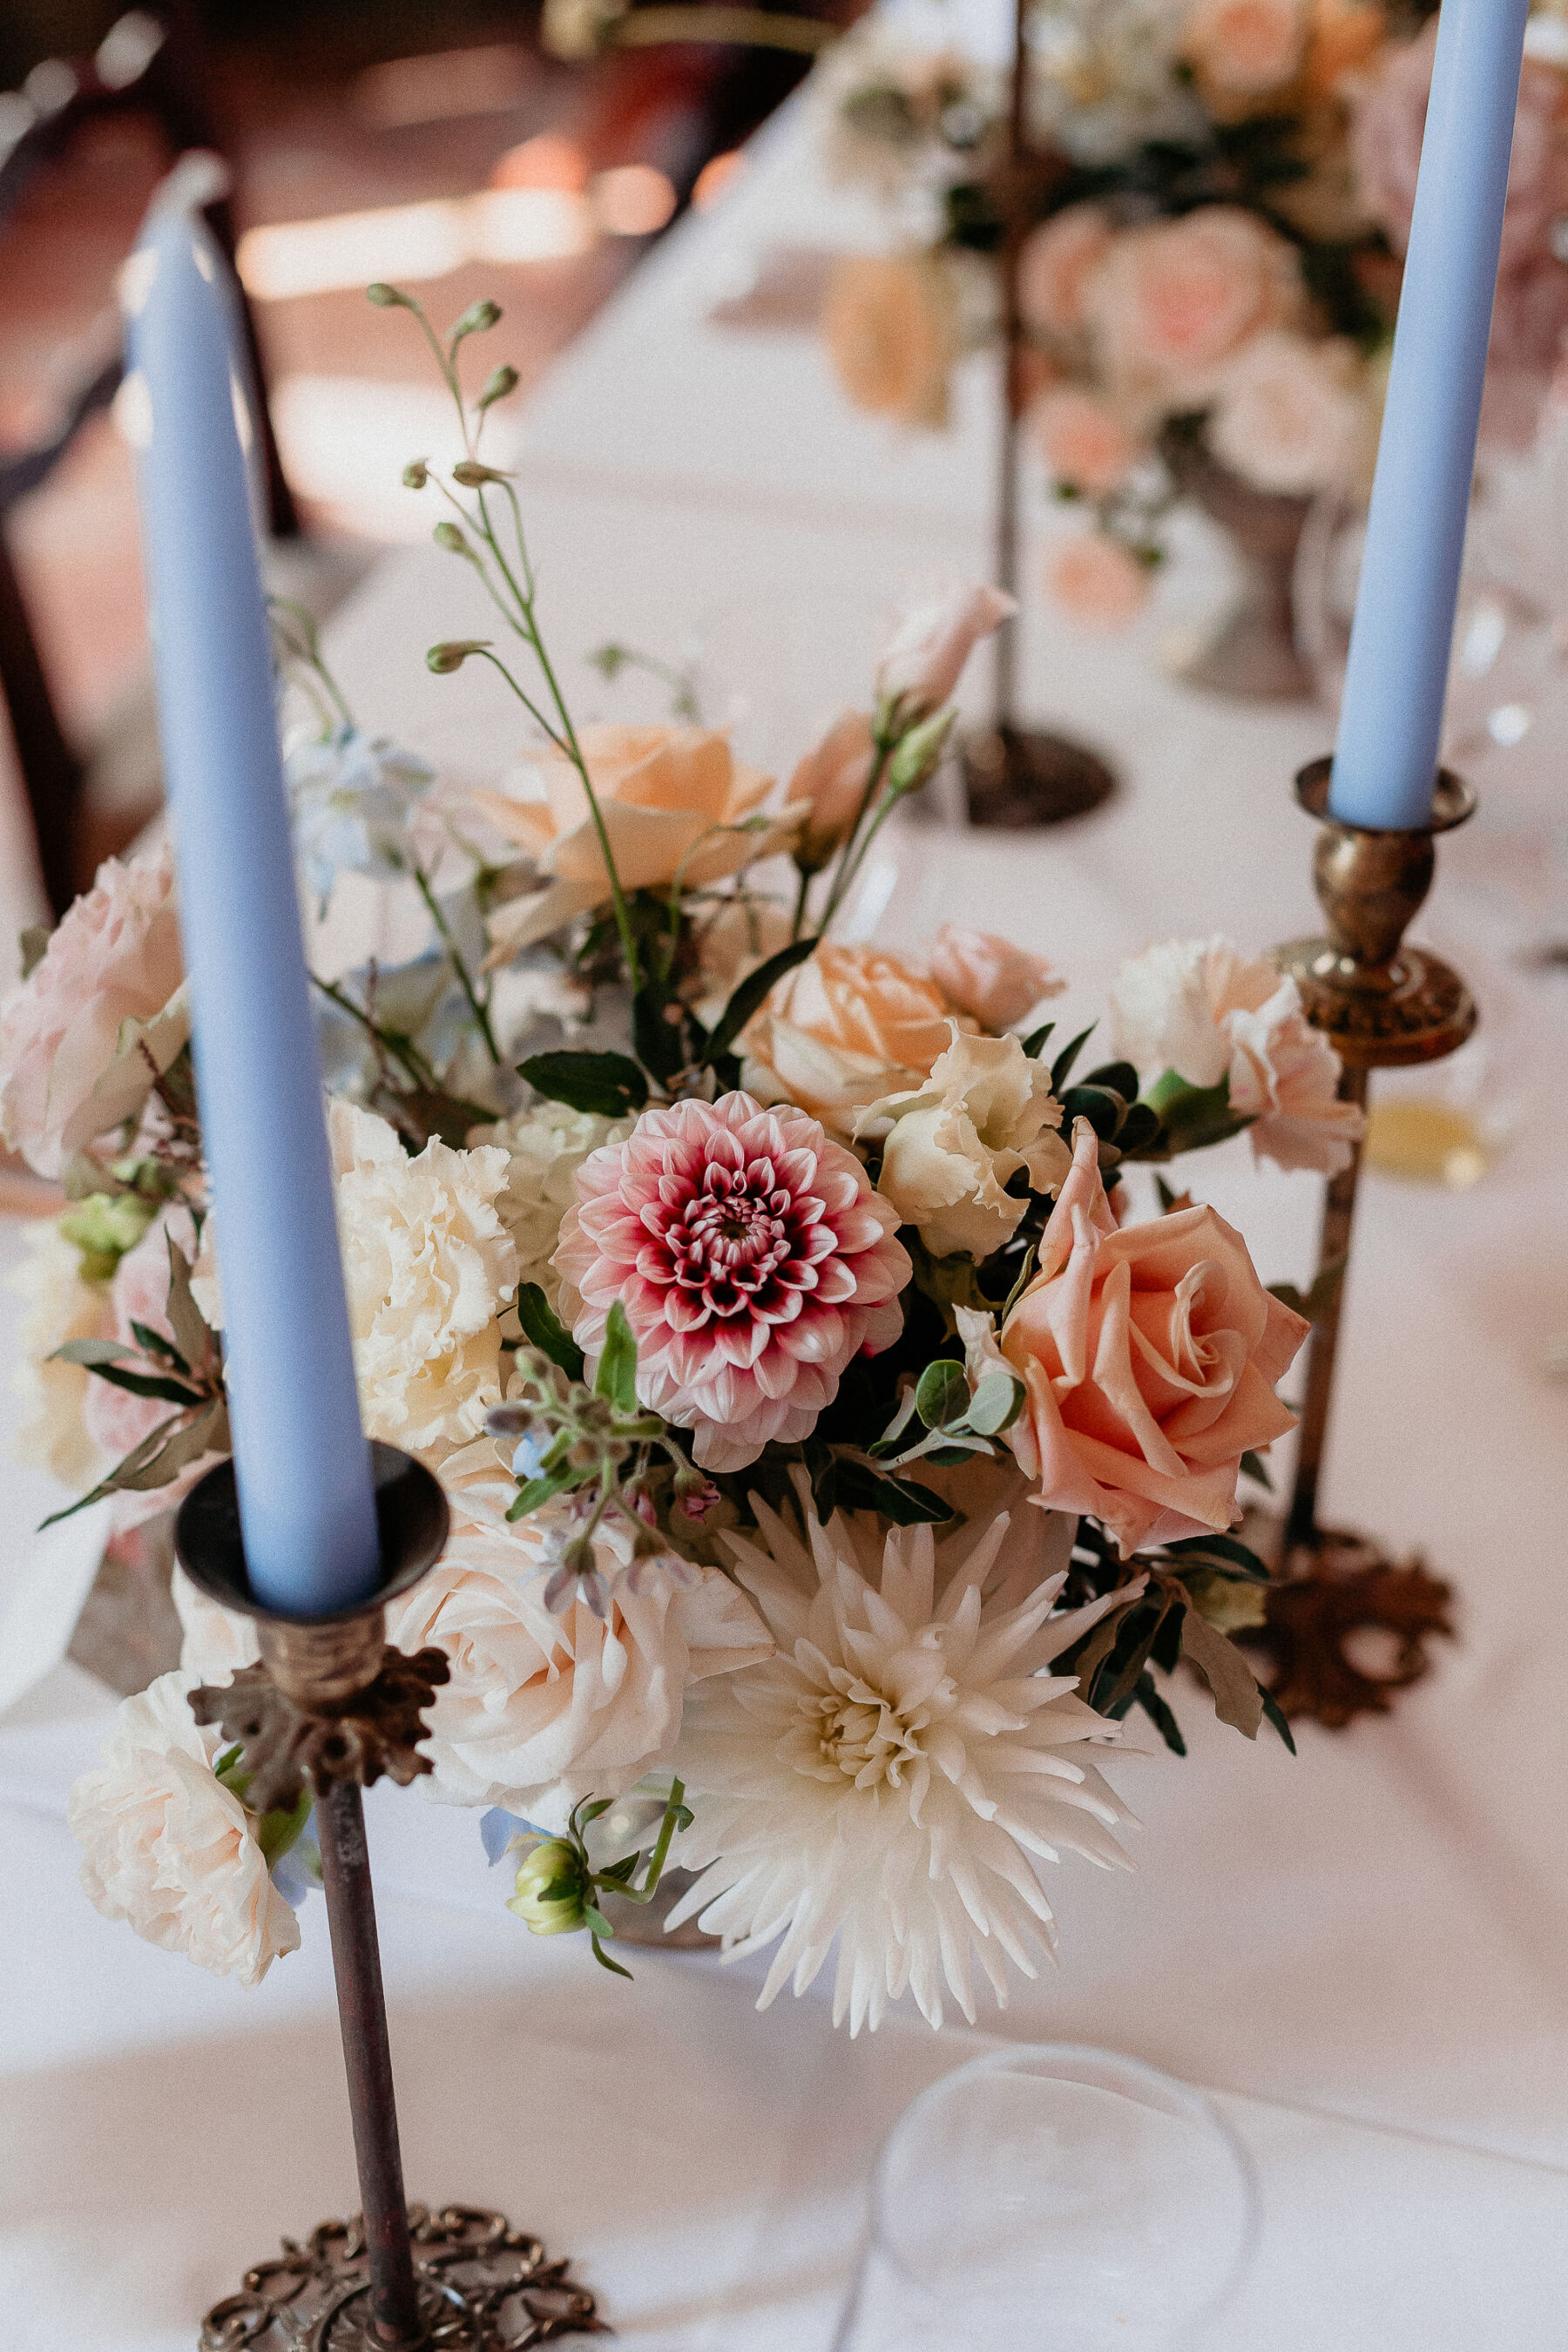 Romantic cream, peach and pale pastel wedding flowers with tall blue taper candles. Italian wedding.